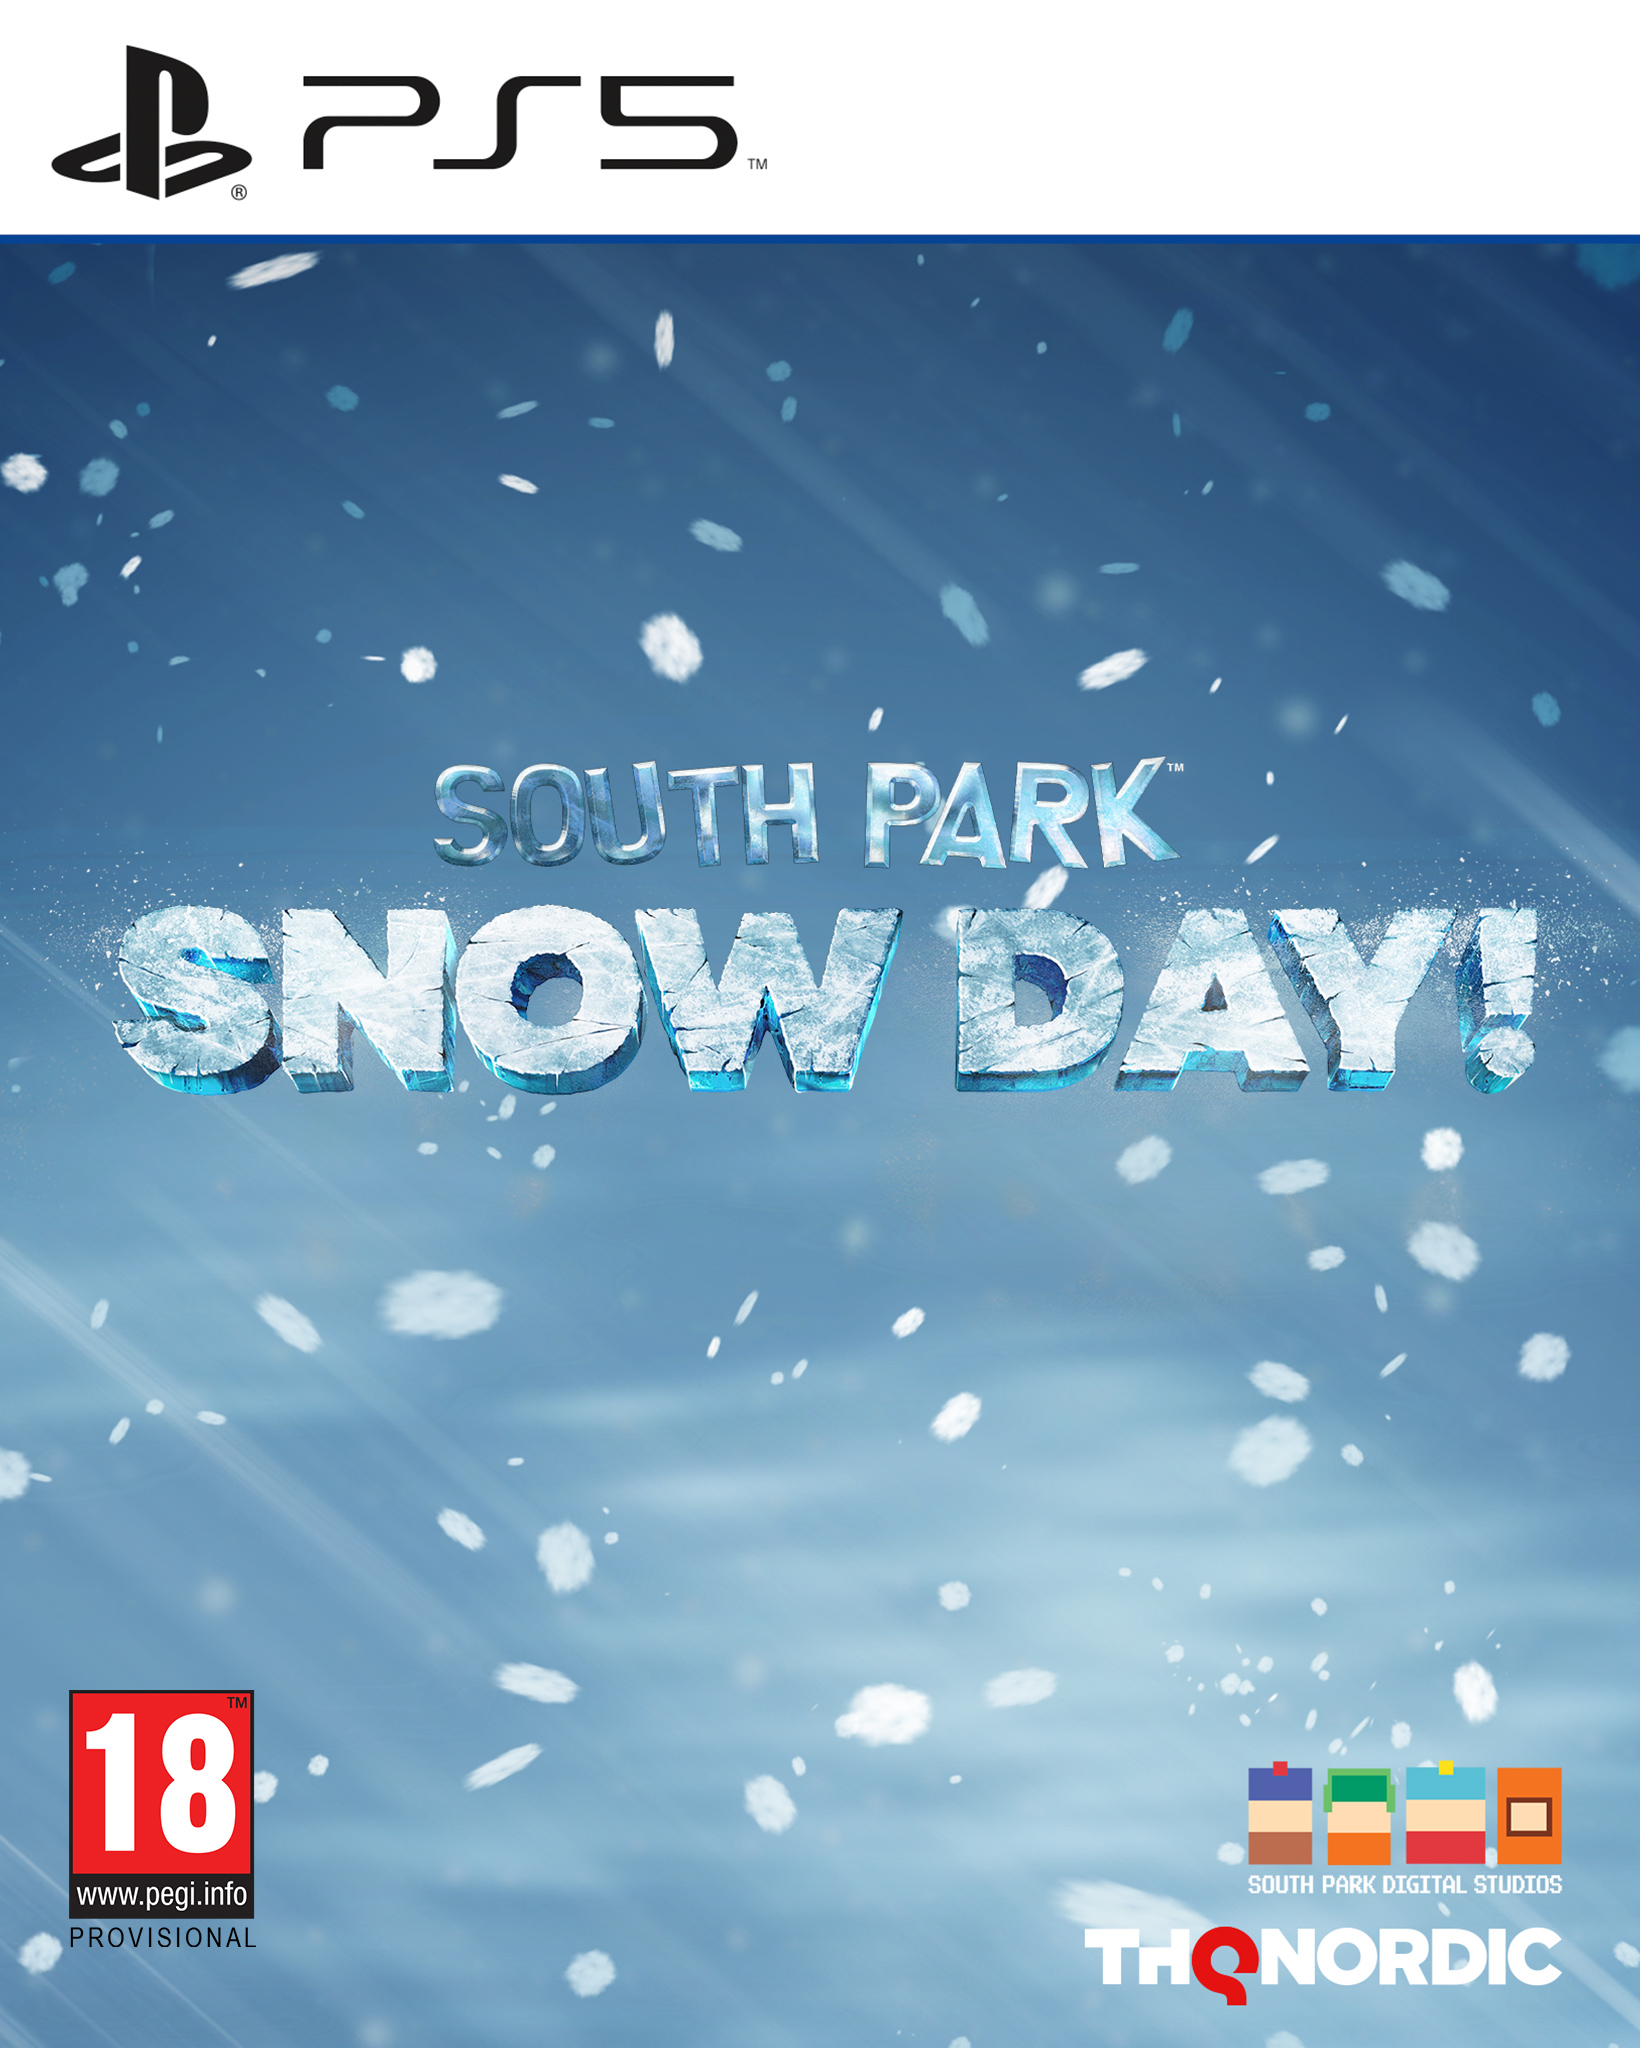 PS5 South Park: Snow Day!